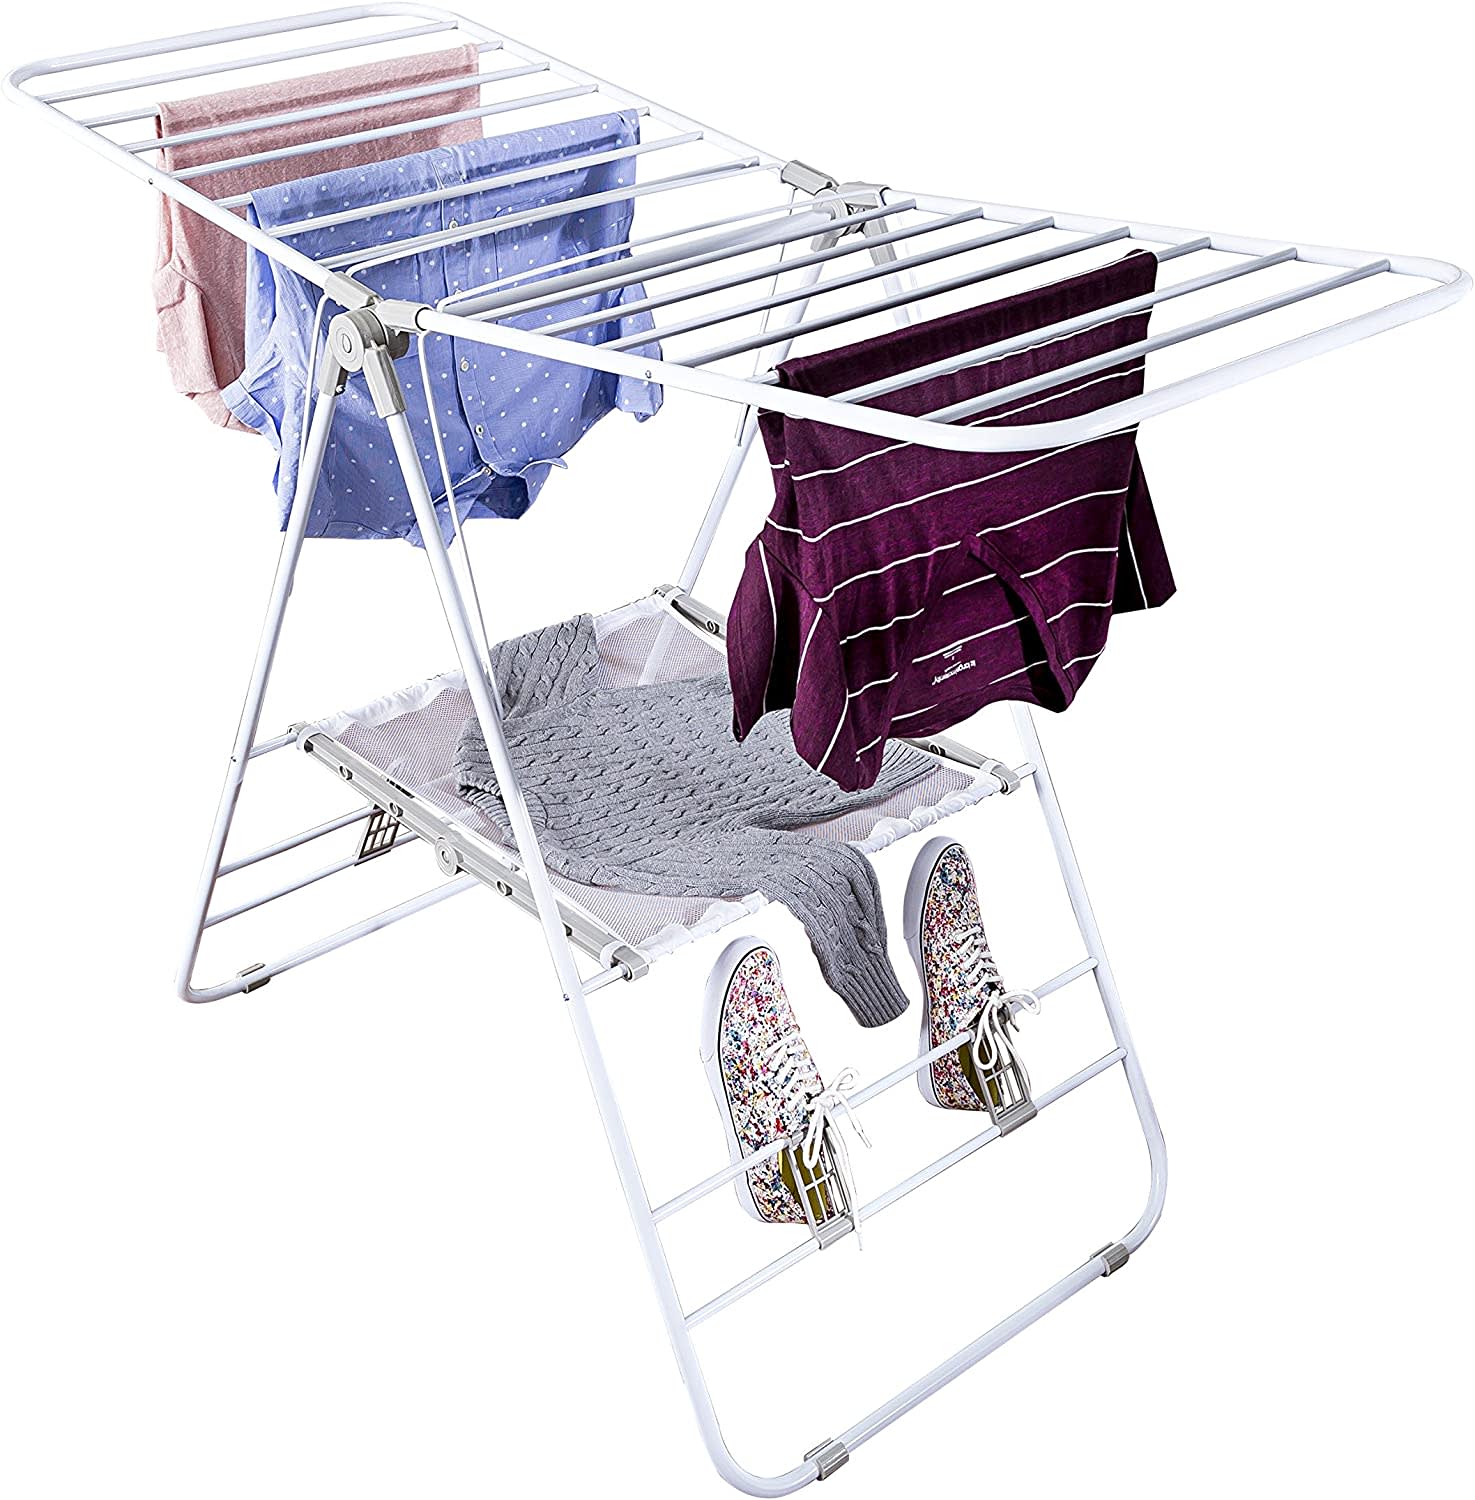 HOUSE AGAIN Clothes Drying Rack, Small Drying Rack Clothing, 3-Tier Laundry  Cloth Dyer Racks Freestand Dryer Rack for Bathroom, Apartment and Laundry